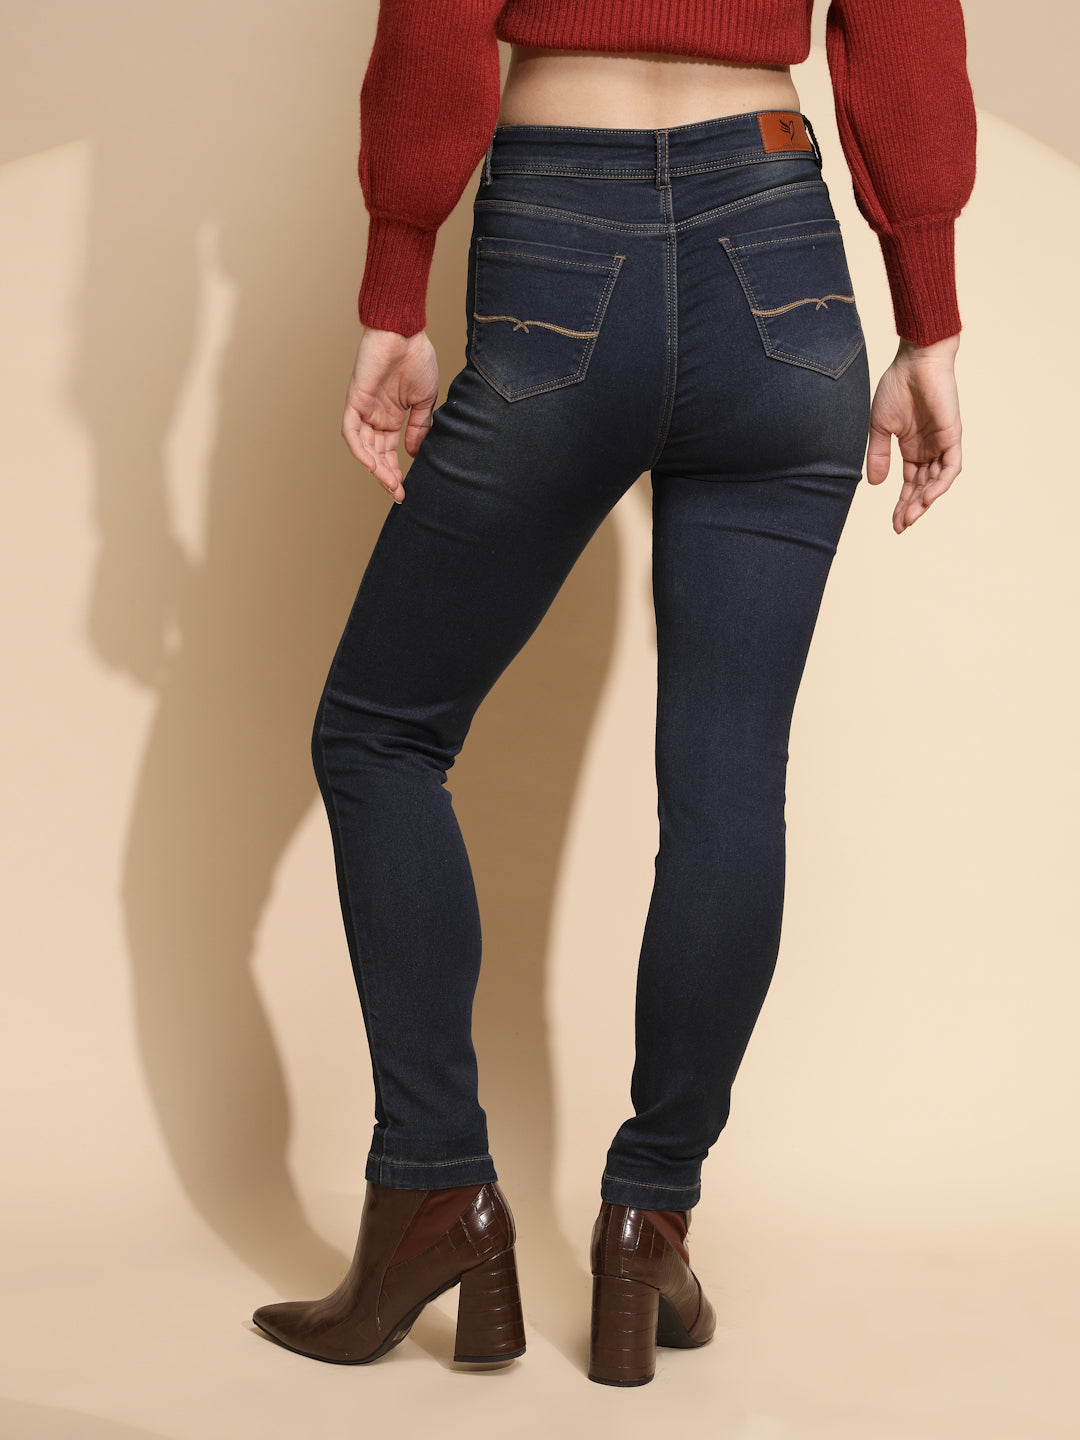 Tint Jeans for Women